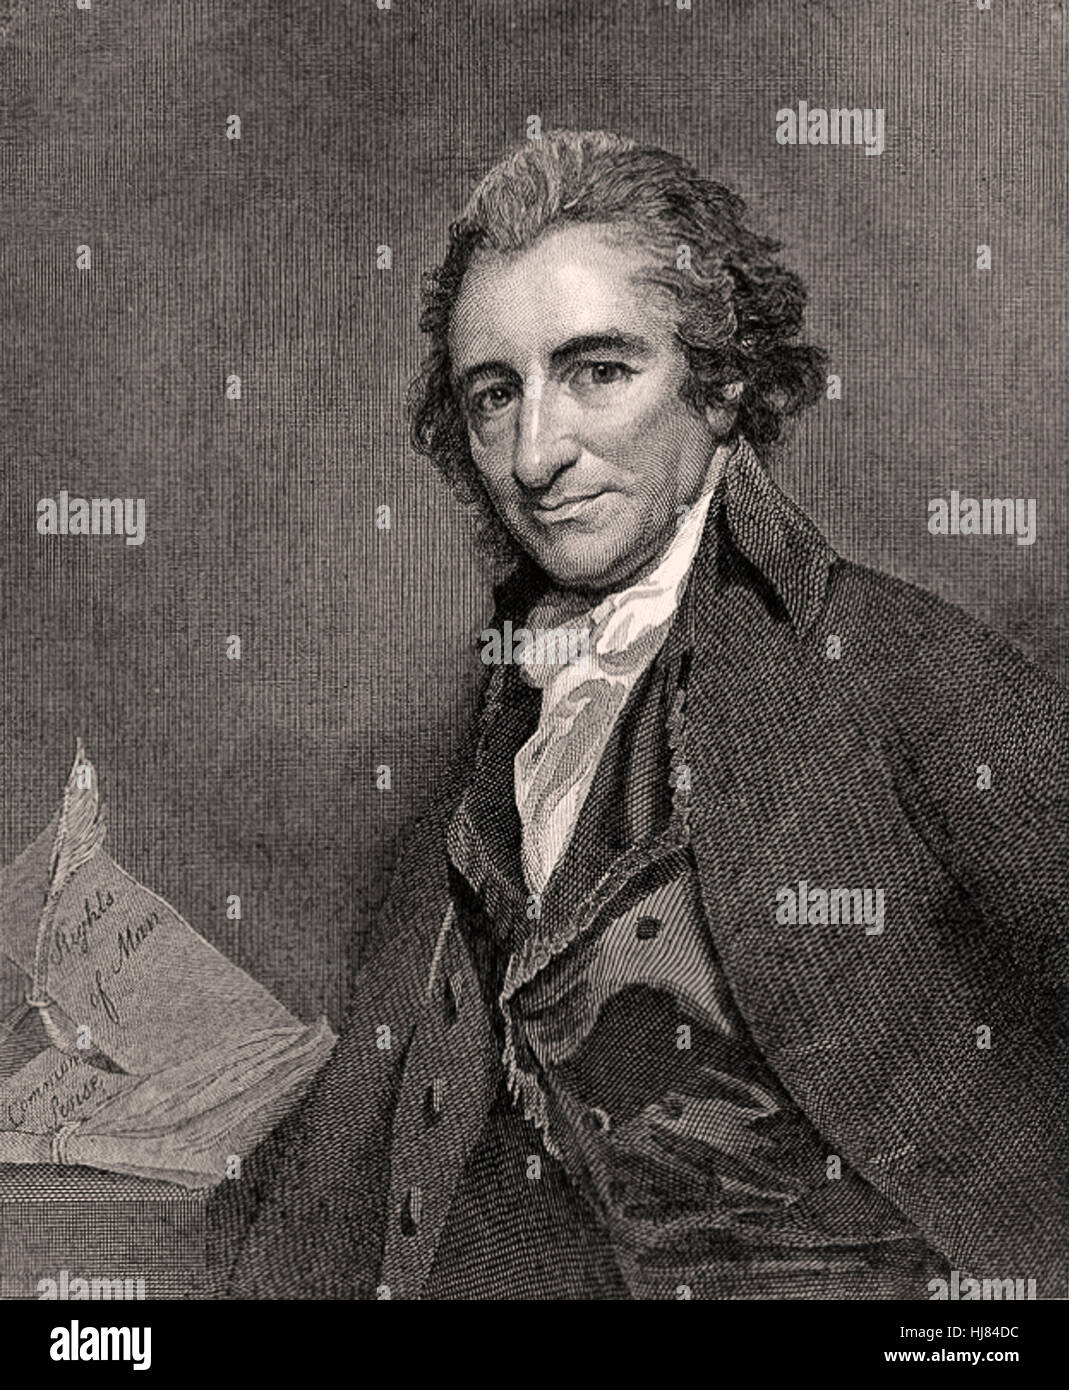 Thomas Paine (1736-1809) English-American political writer, revolutionary and one of the founding fathers of the United States of America. Engraving by William Sharp (1749-1824). Stock Photo